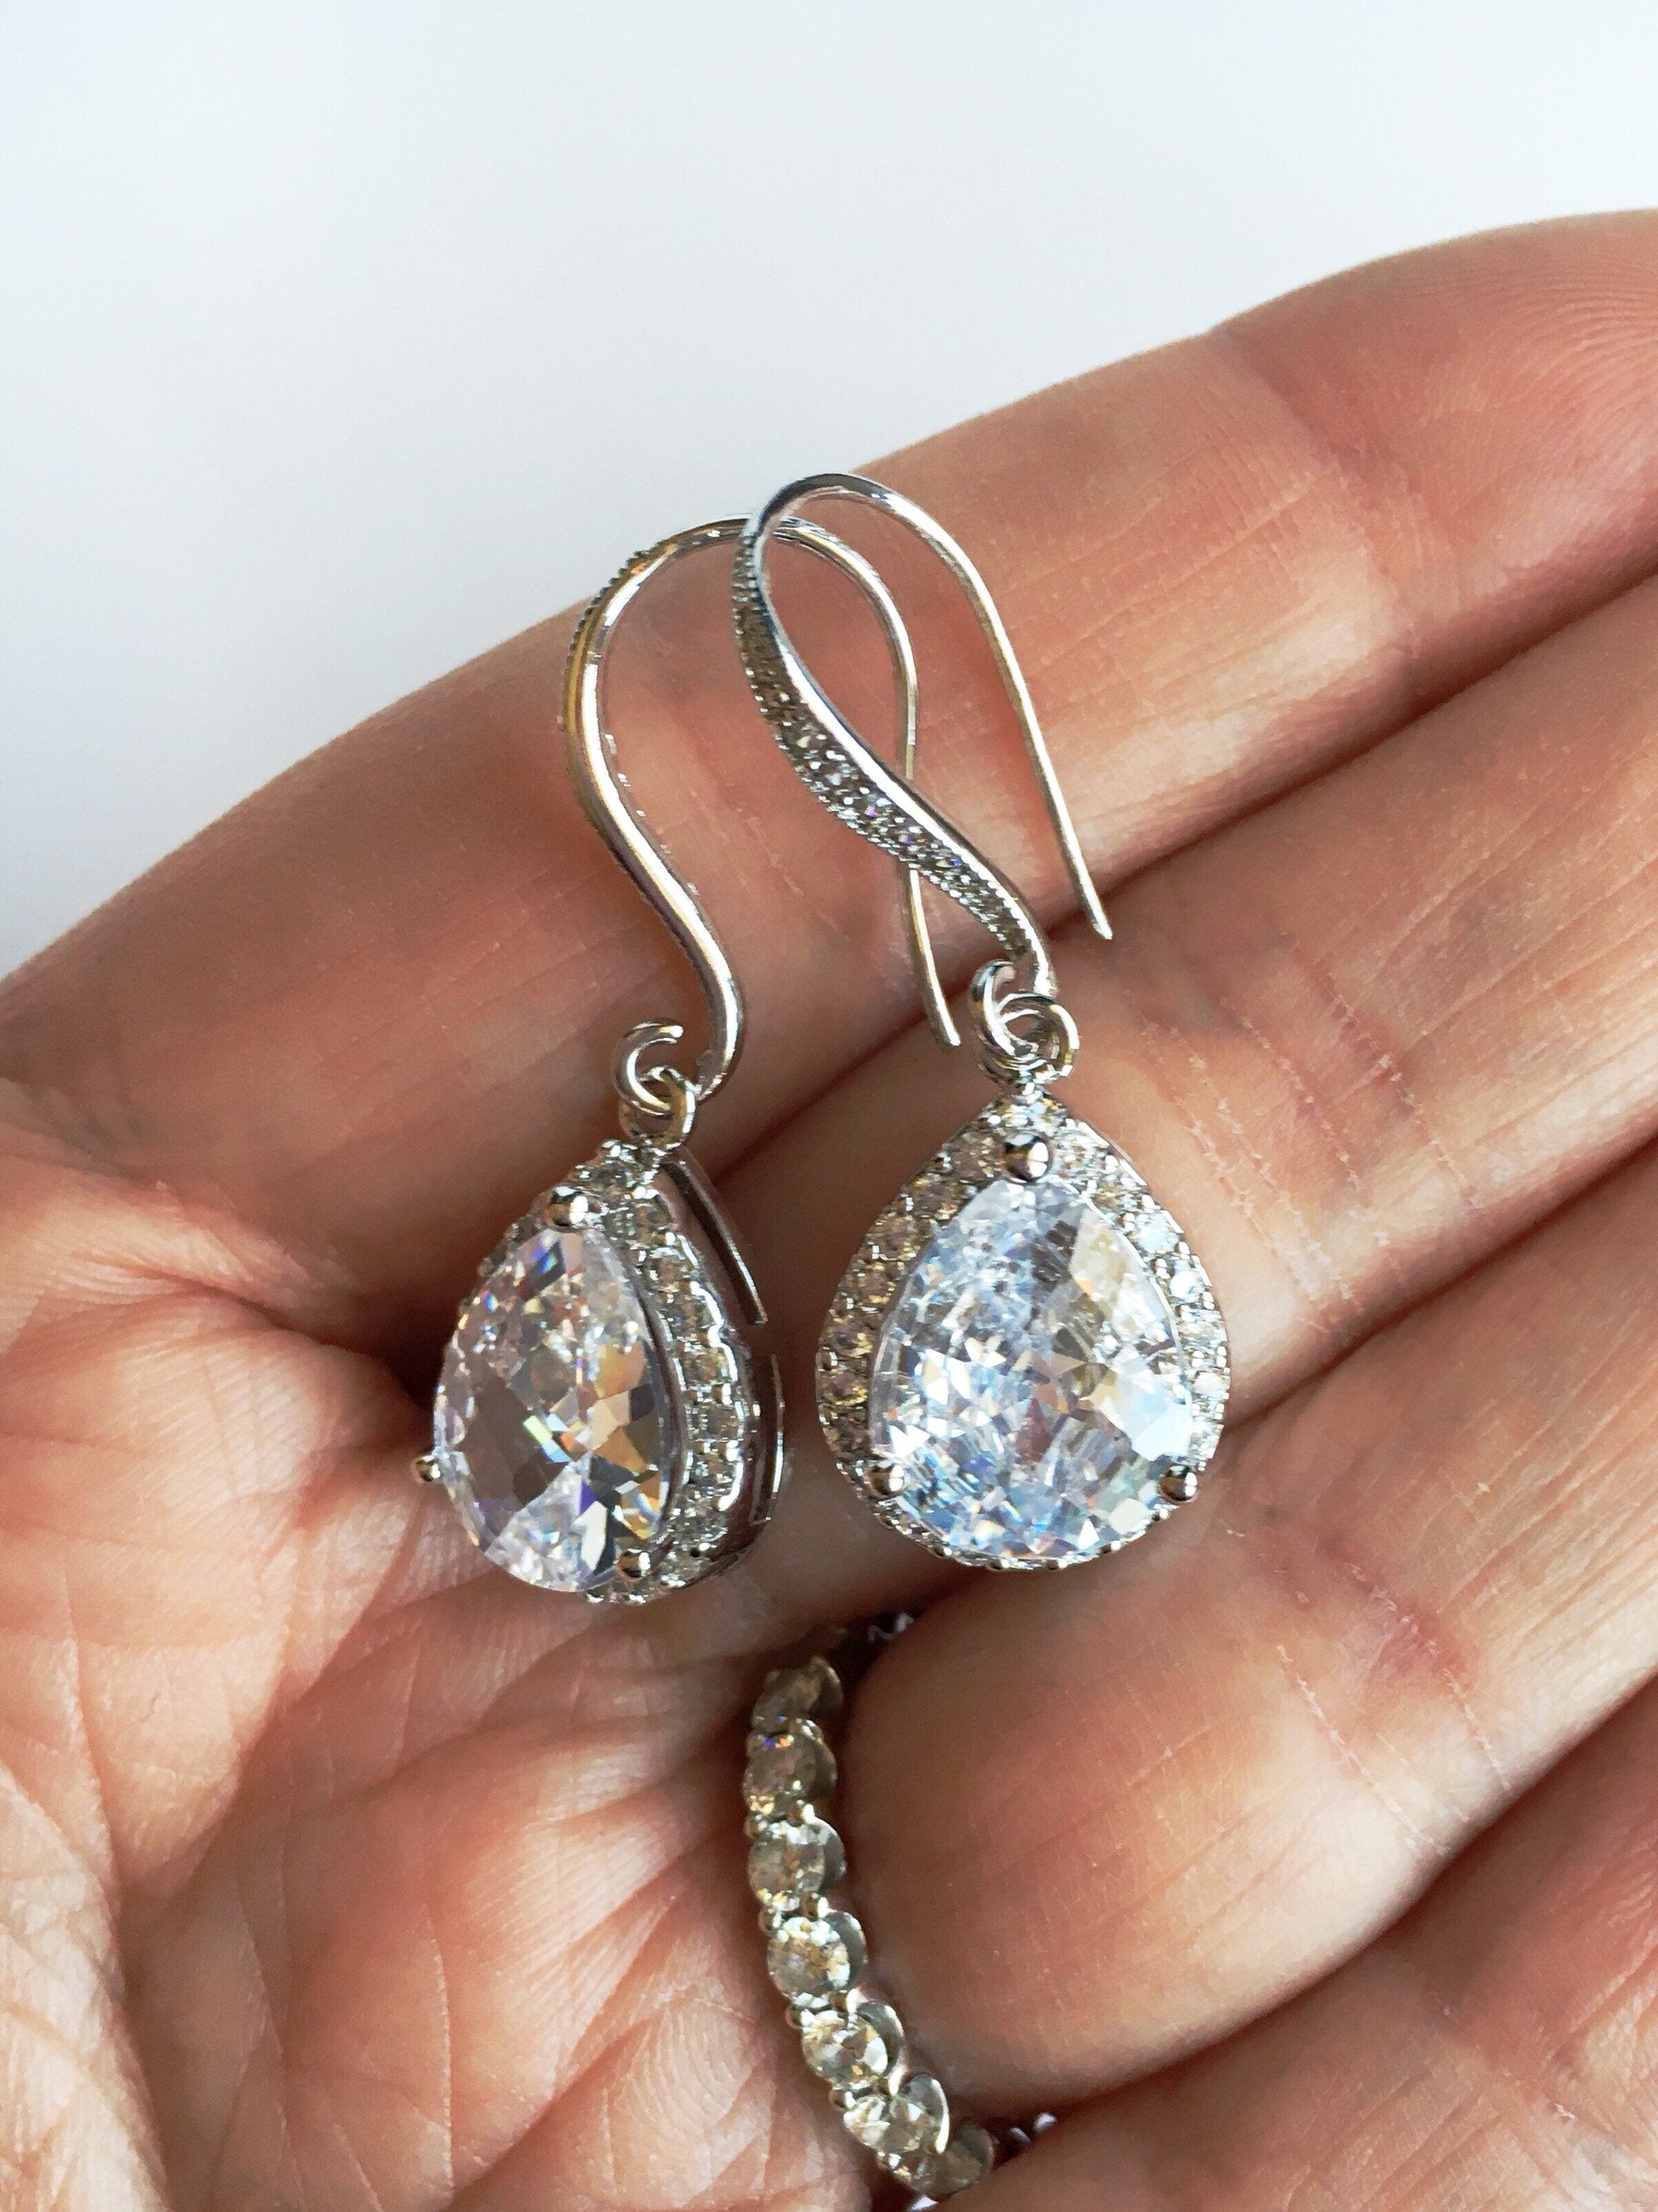 Women holding Clear cubic zirconia teardrop crystals in a silver colored rhodium plated brass setting earrings in hand.